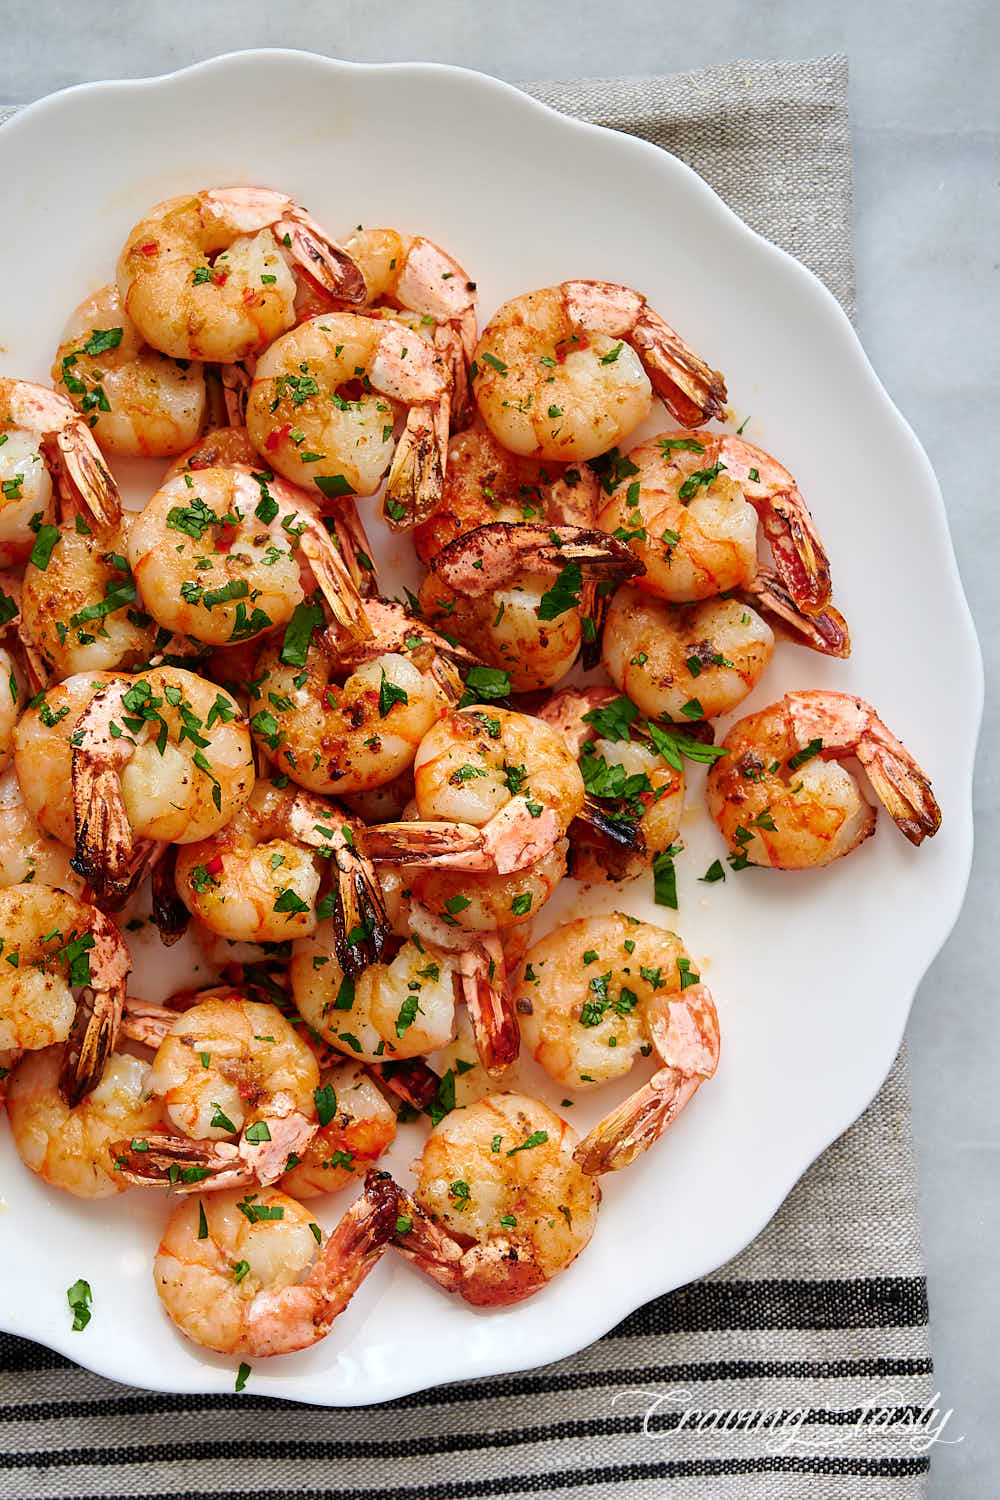 Top down view of a platter with broiled shrimp garnished with chopped parsley.